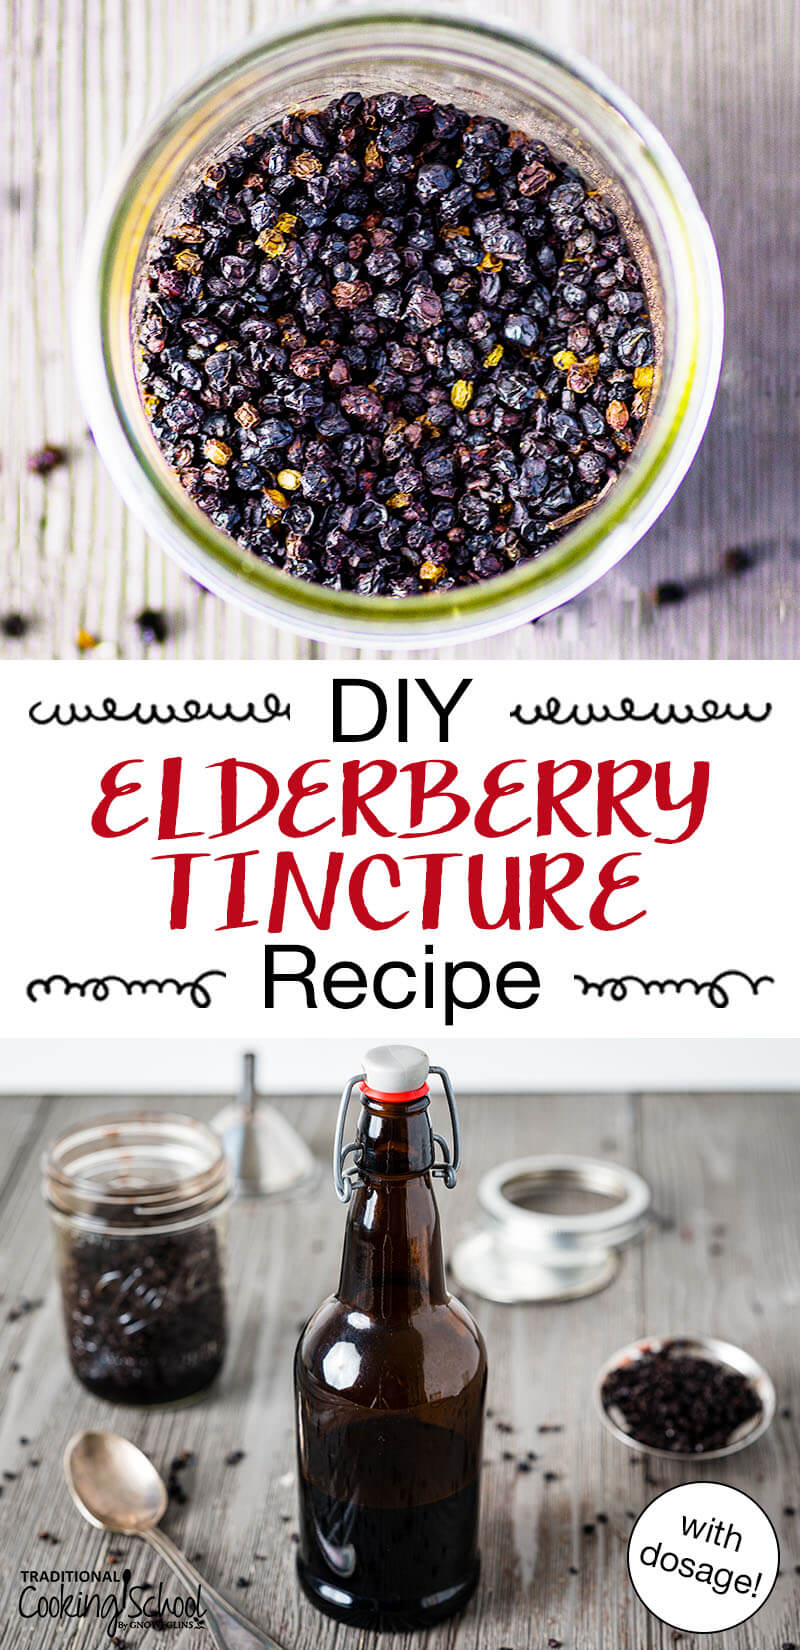 Two images of elderberry tincture being poured into a bottle and dried elderberries infusing into vodka. Text overlay says, "DIY Elderberry Tincture".